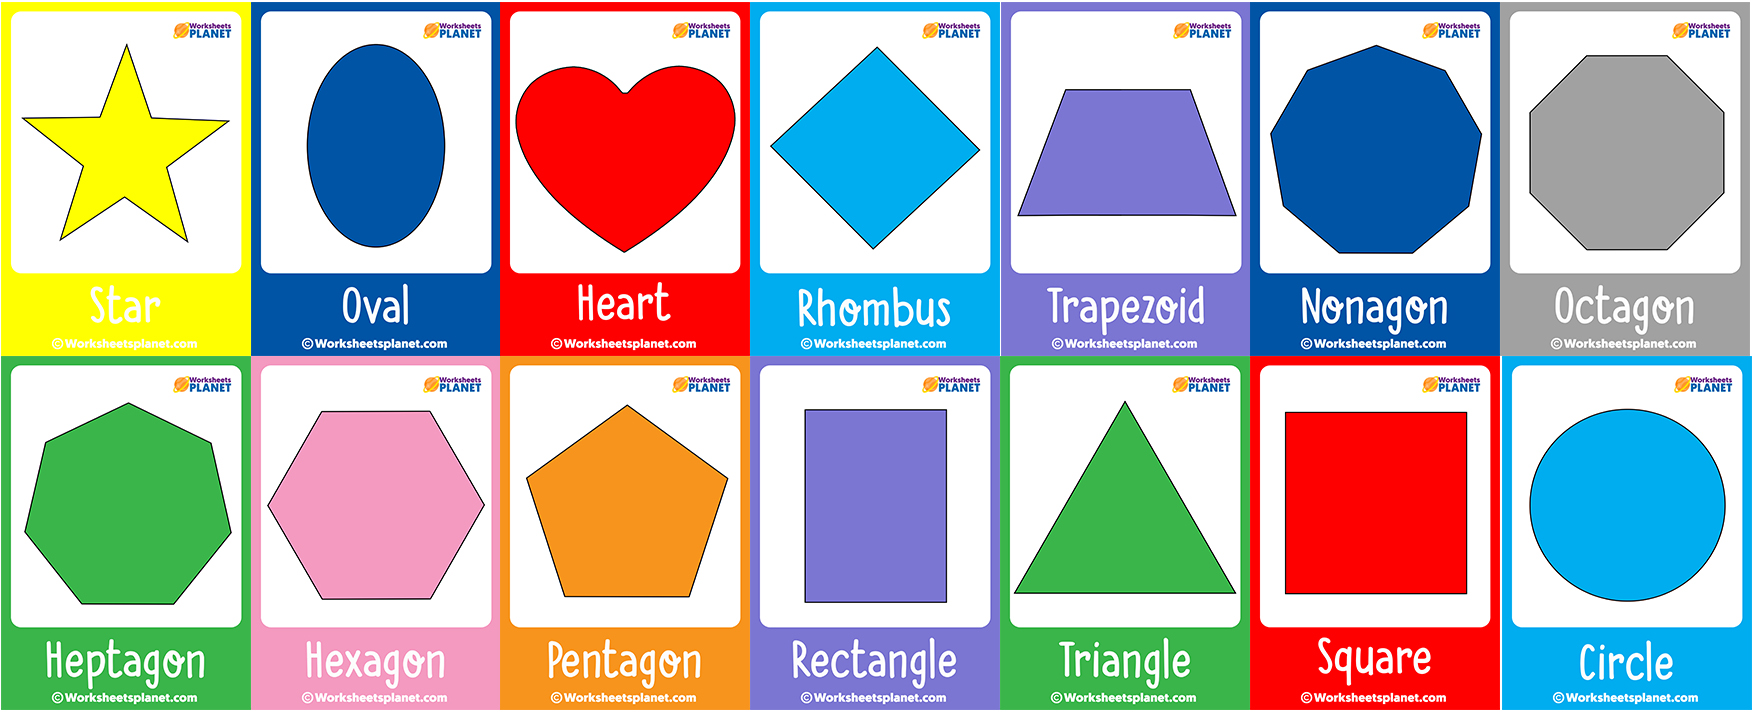 geometry-shapes-flashcards-teacher-resources